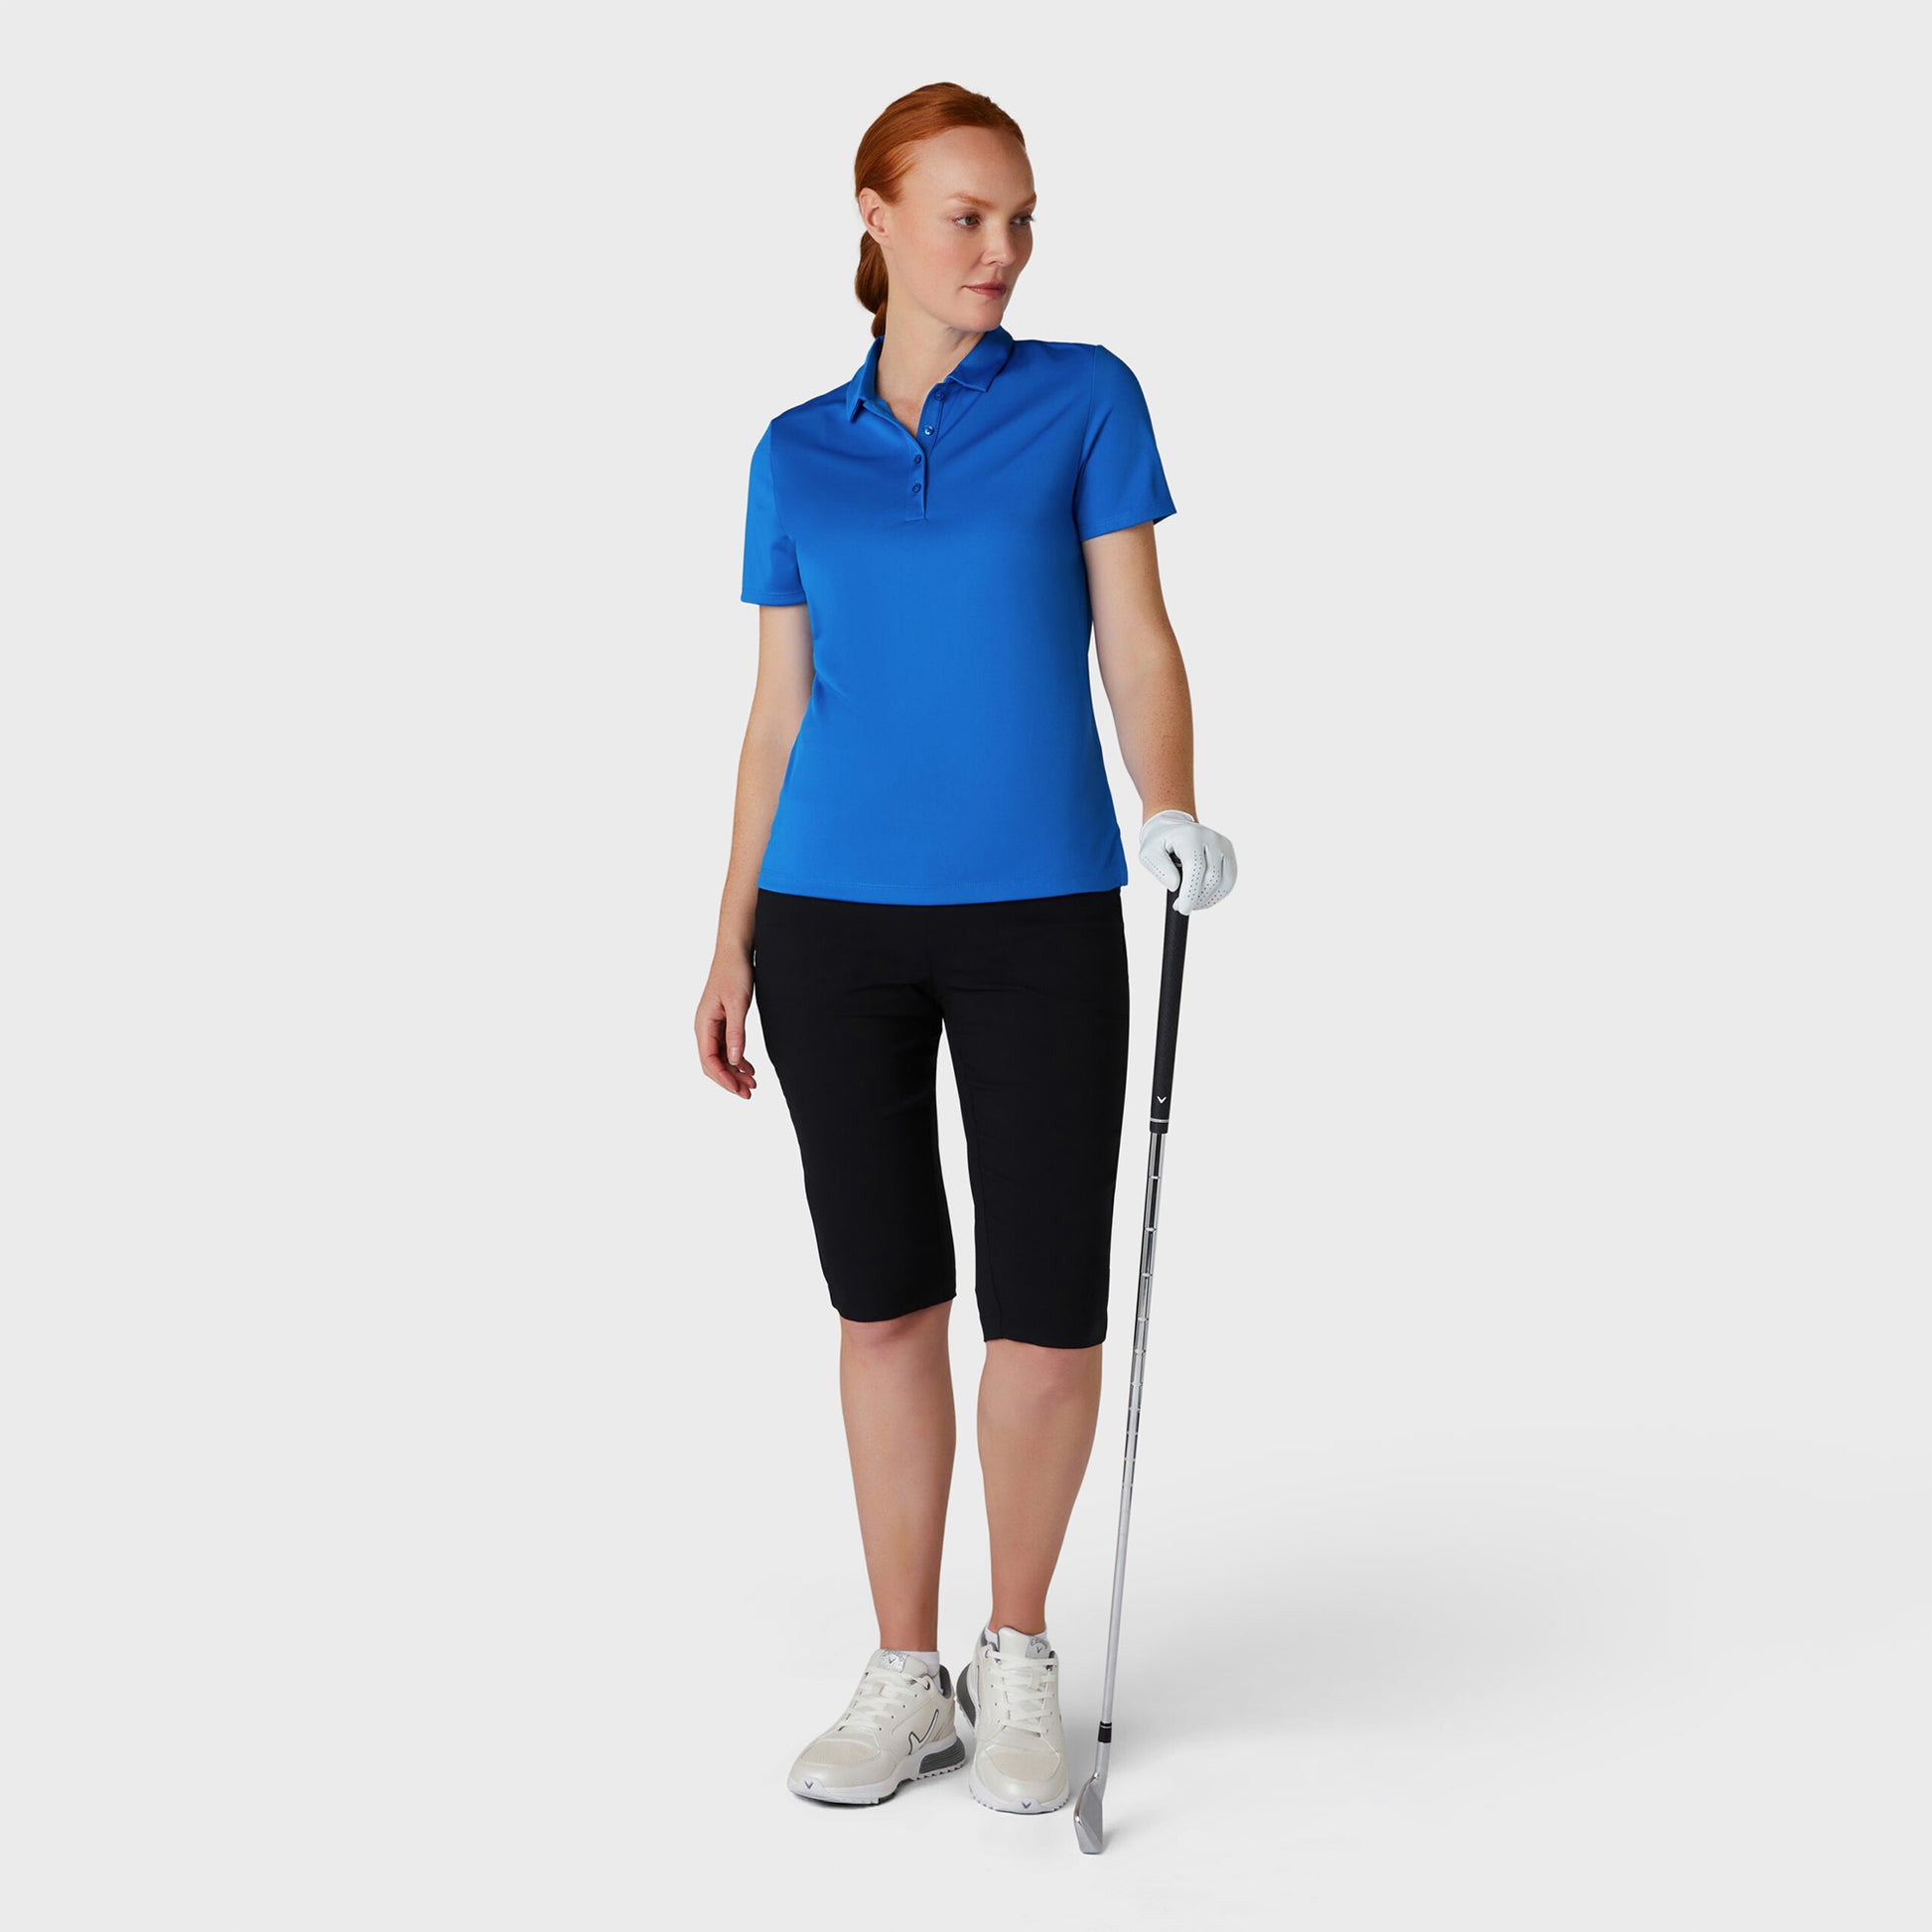 Callaway Ladies Skydiver Blue Short Sleeve Polo with UV Block Protection